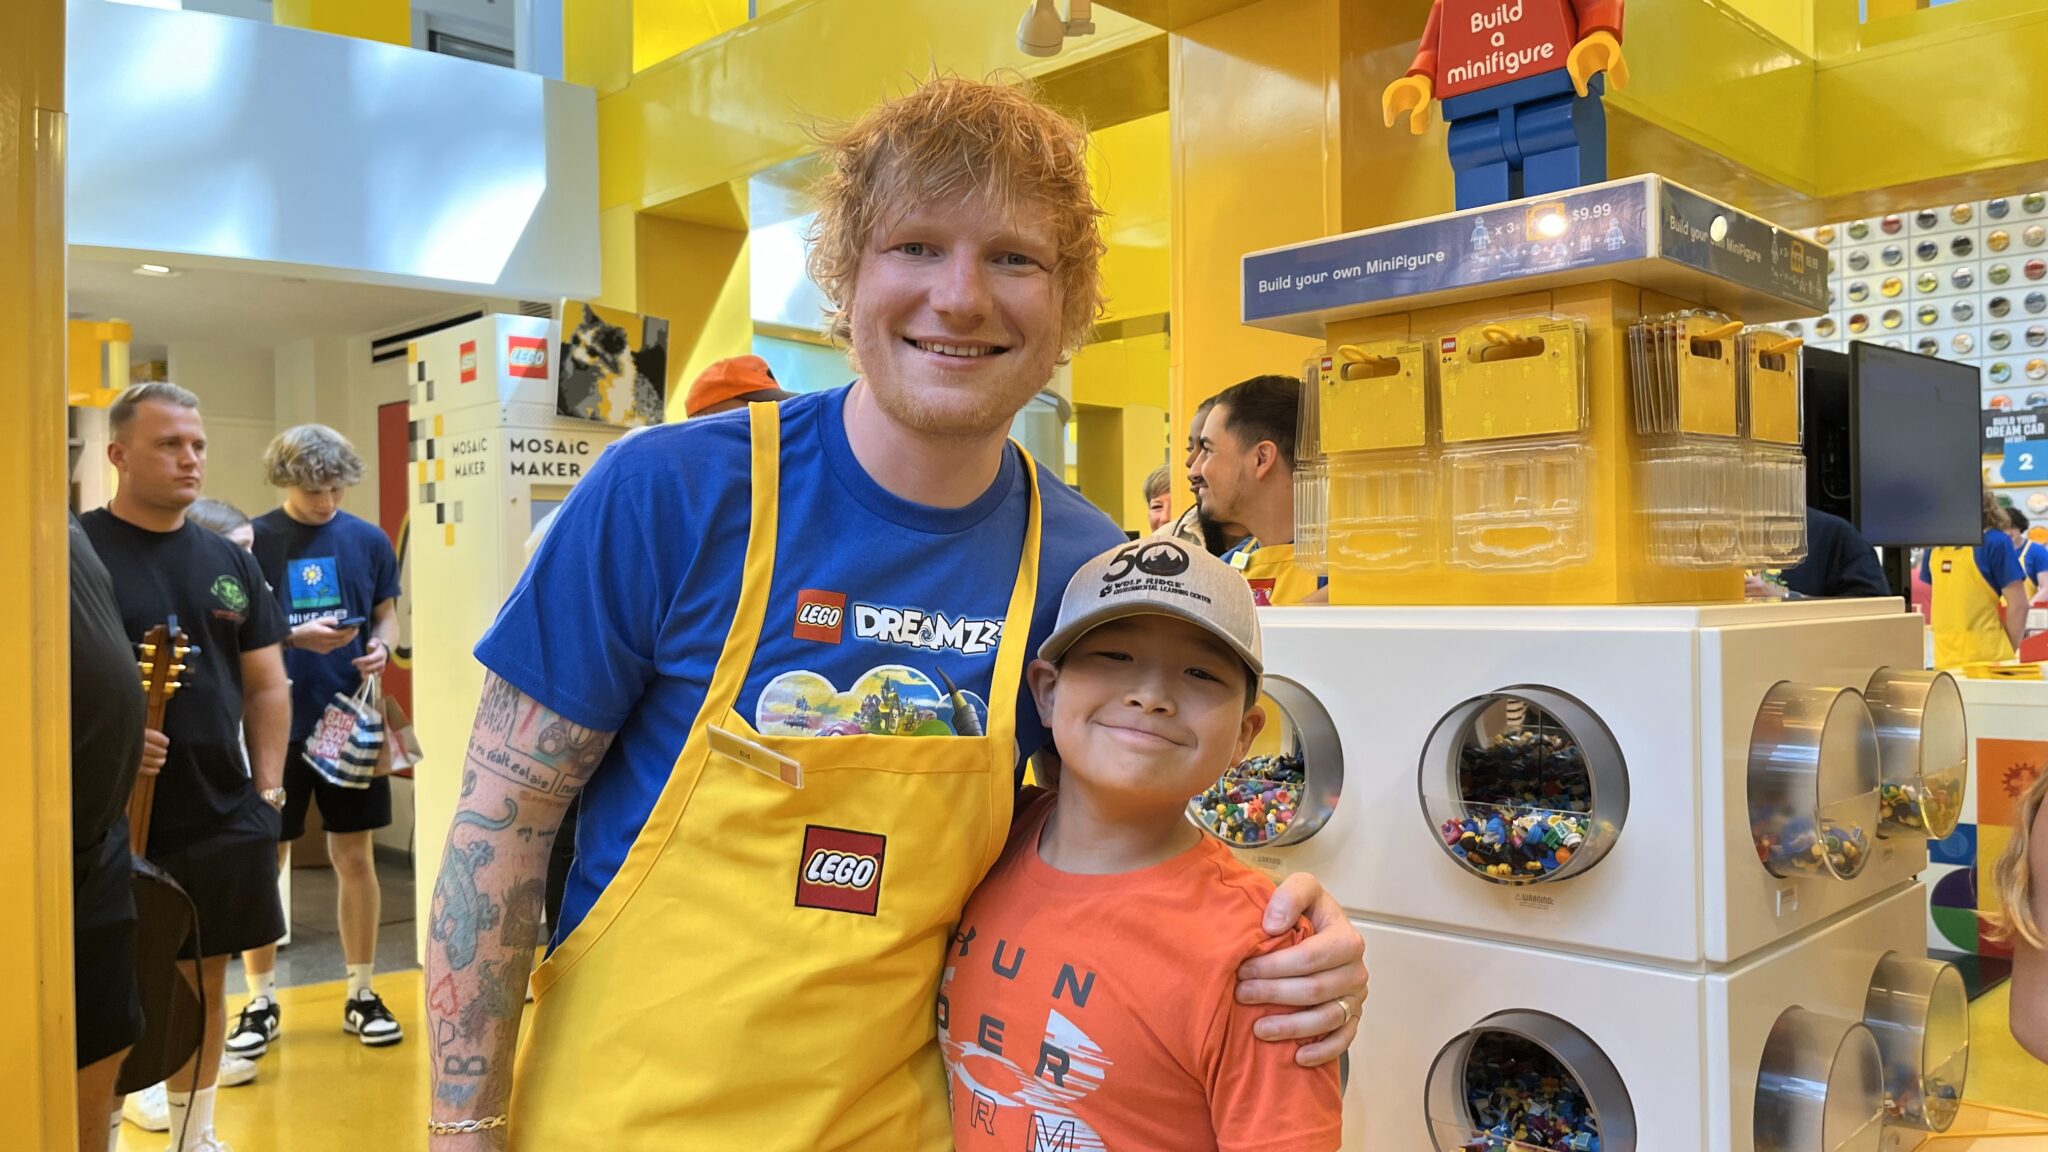 Ed Sheeran stops at LEGO Store in Mall of America ahead of Saturday's